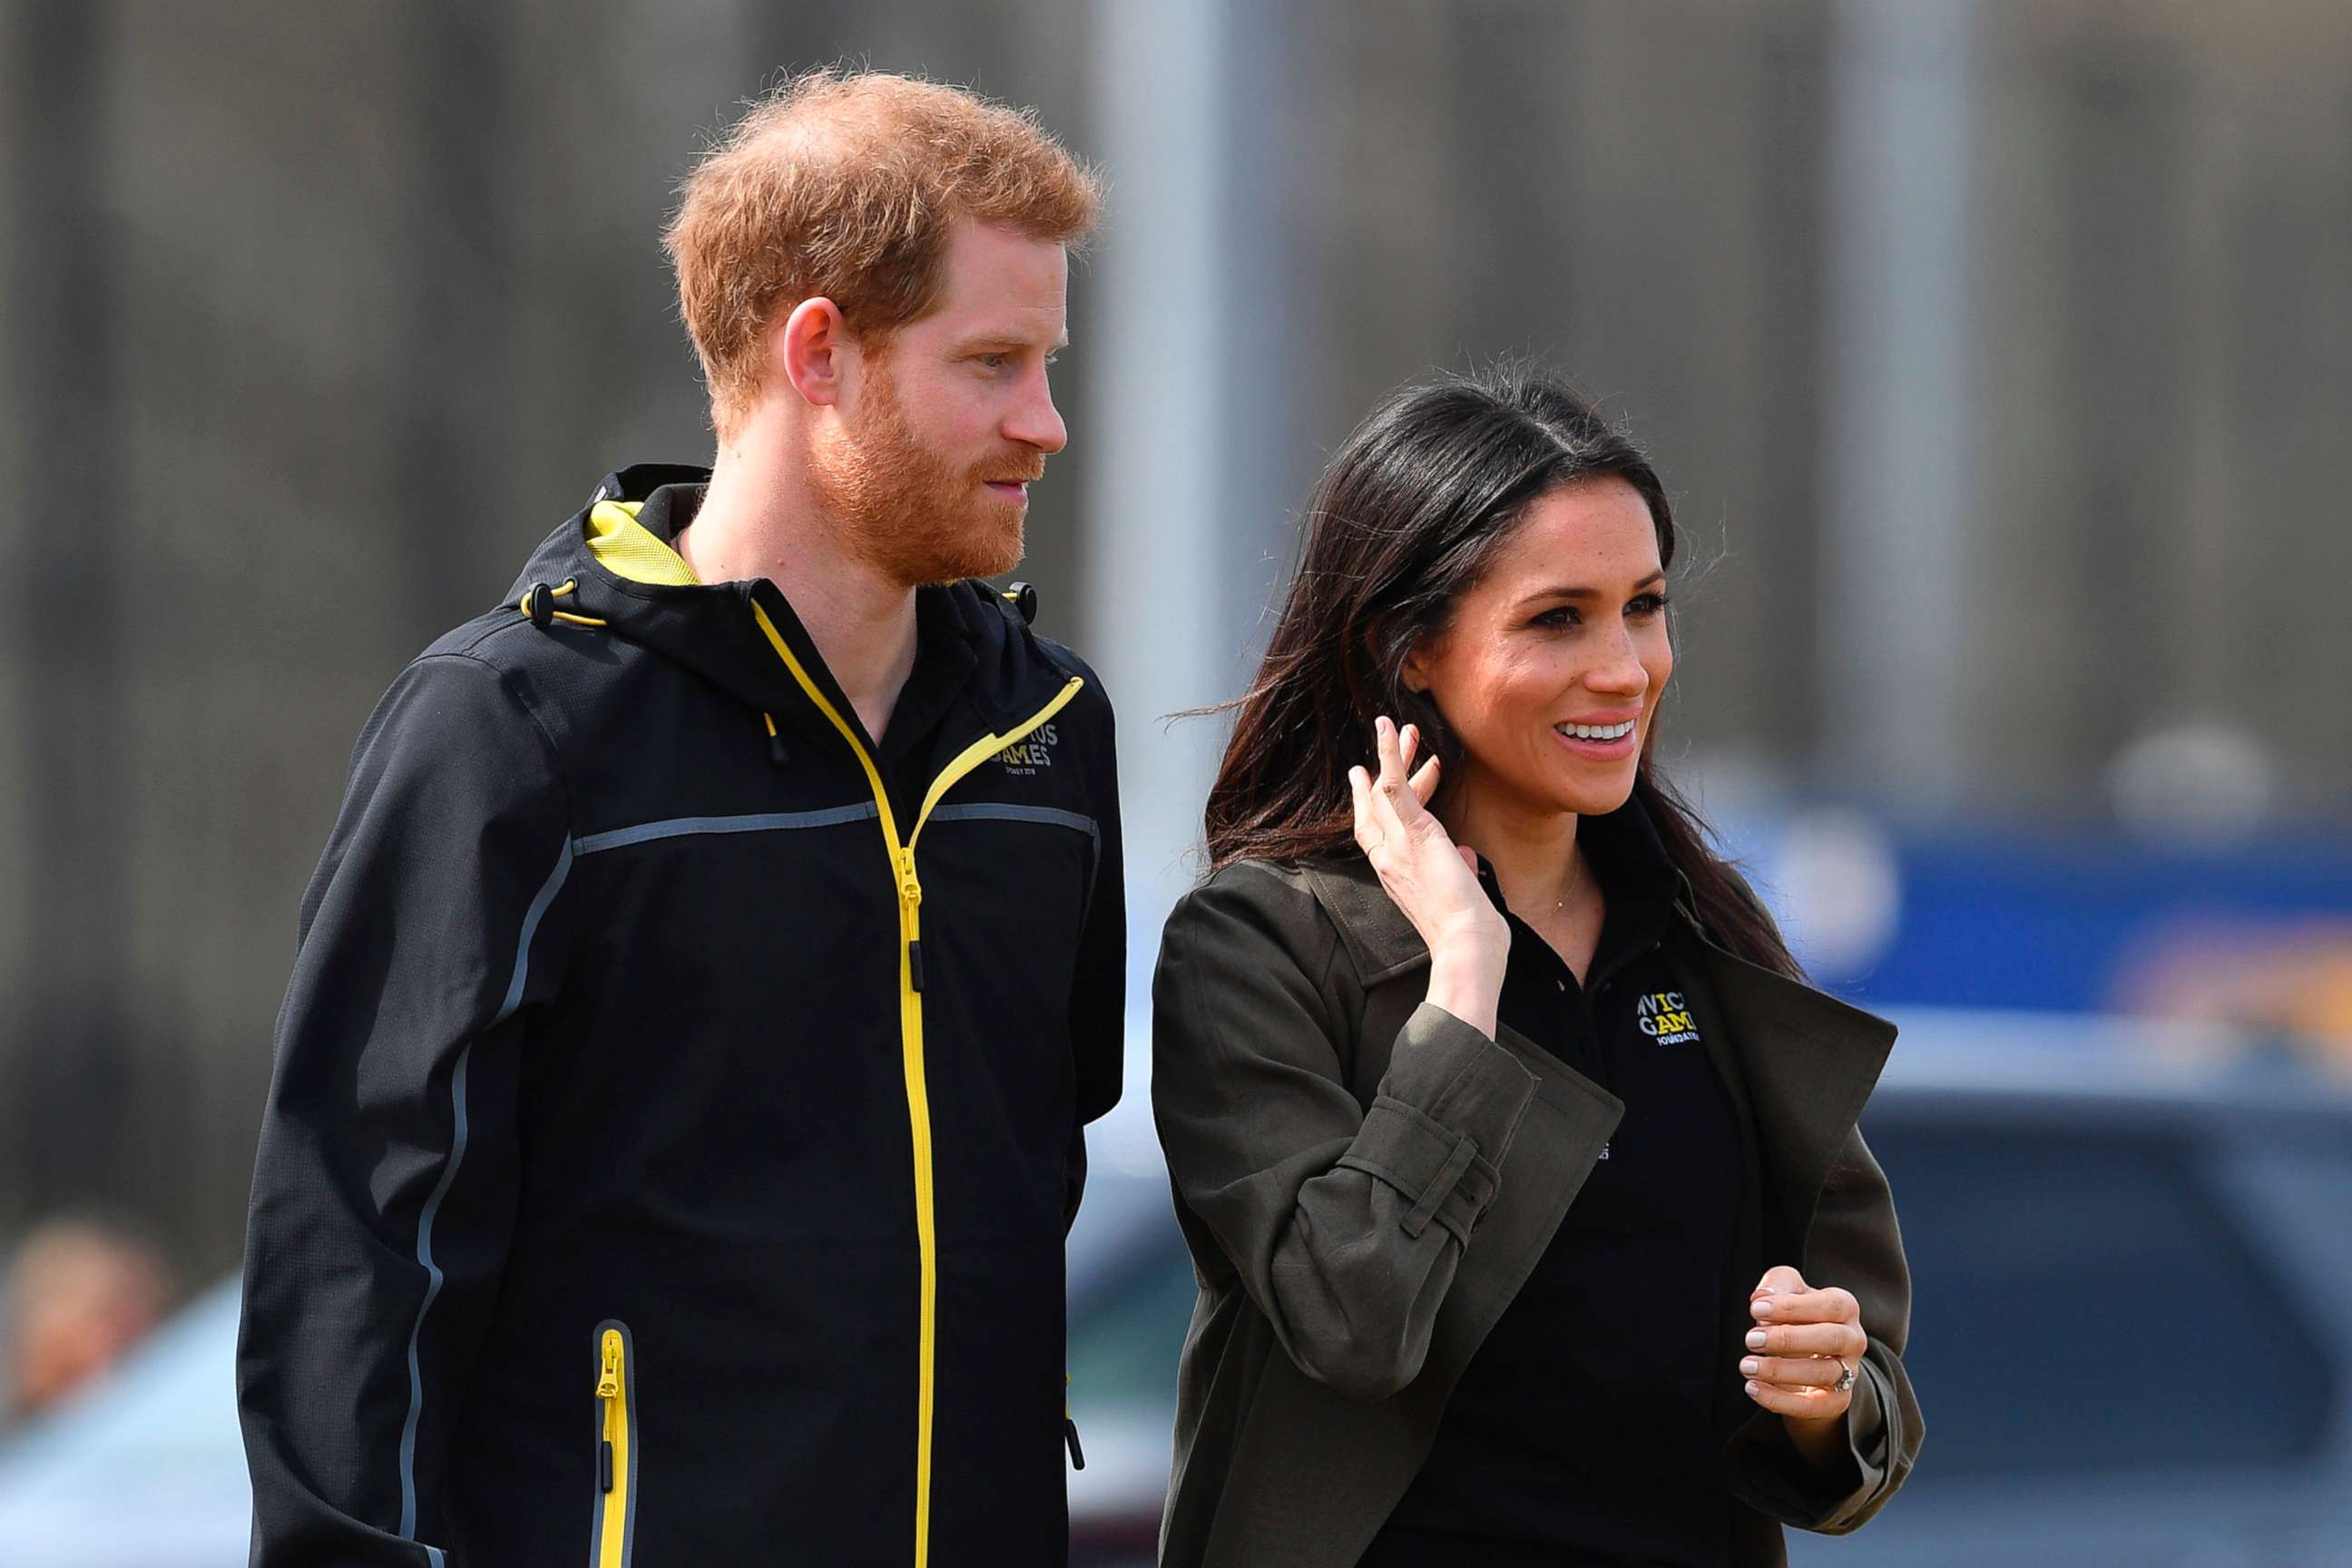 PHOTO: Britain's Prince Harry and his fiancee actress Meghan Markle arrive to meet participants at the UK team trials for the Invictus Games Sydney 2018 at the University of Bath Sports Training Village in Bath, England, April 6, 2018.